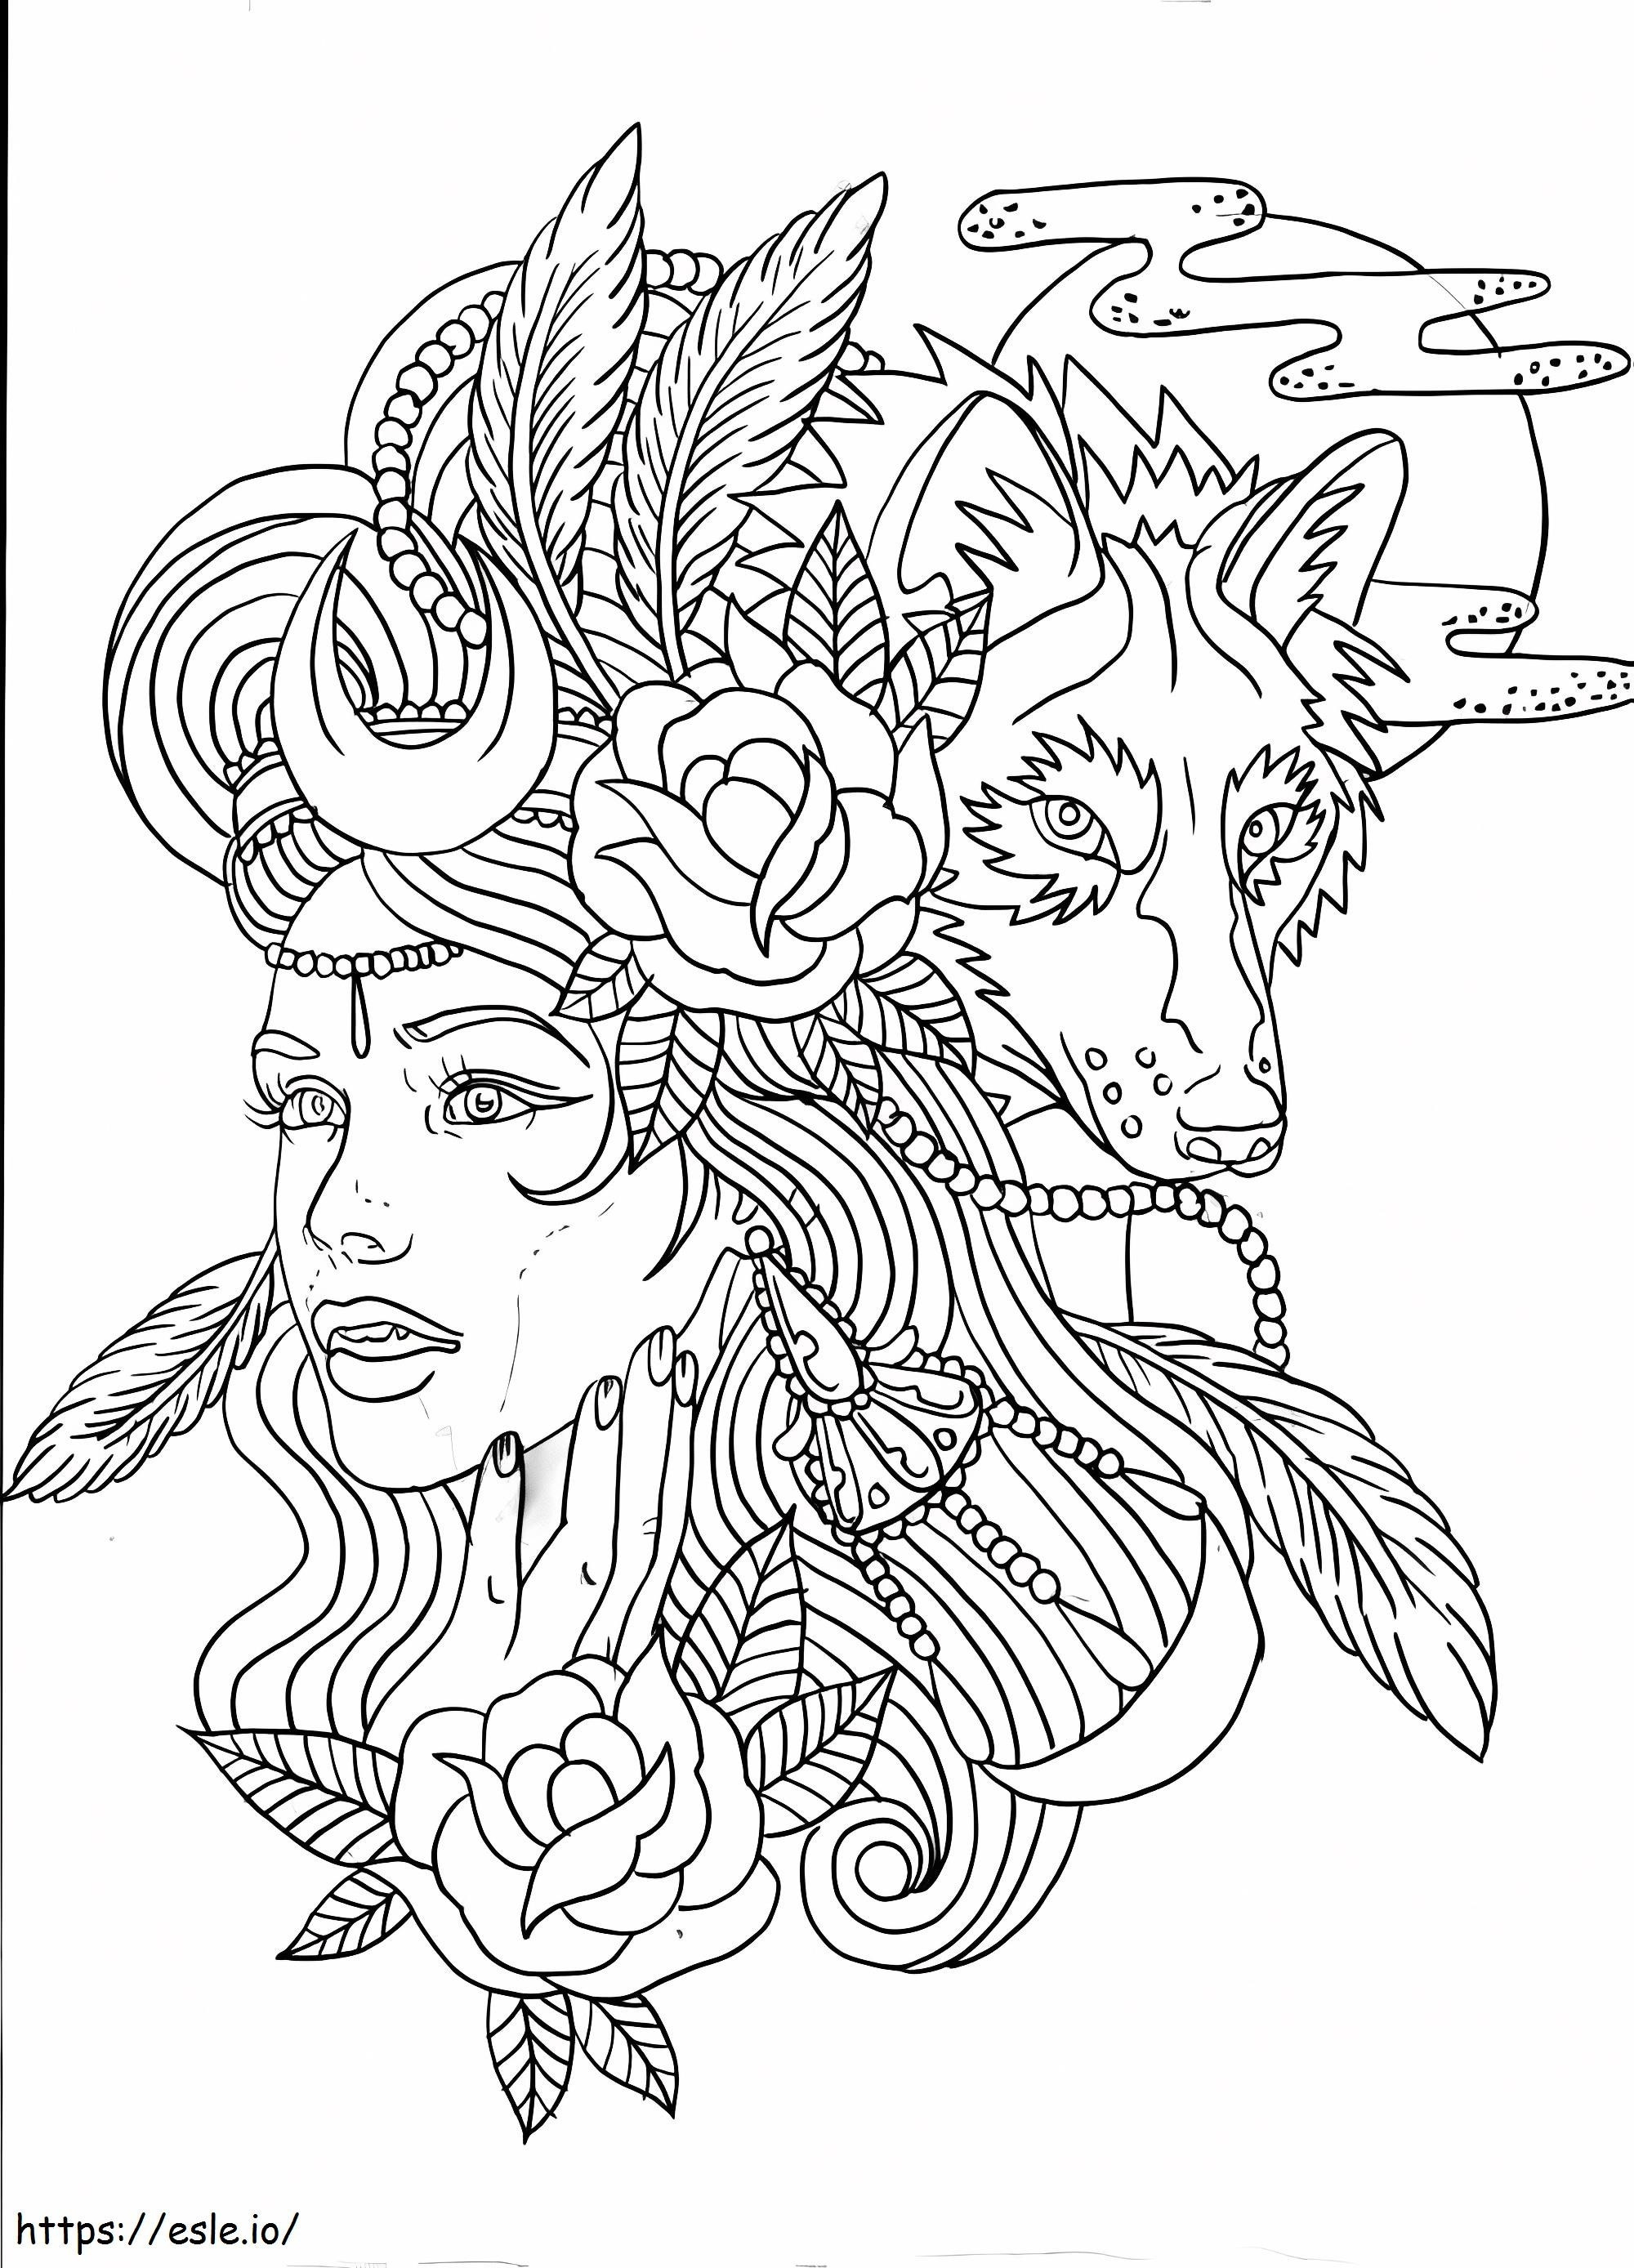 Hardcore Wolf Girl coloring page